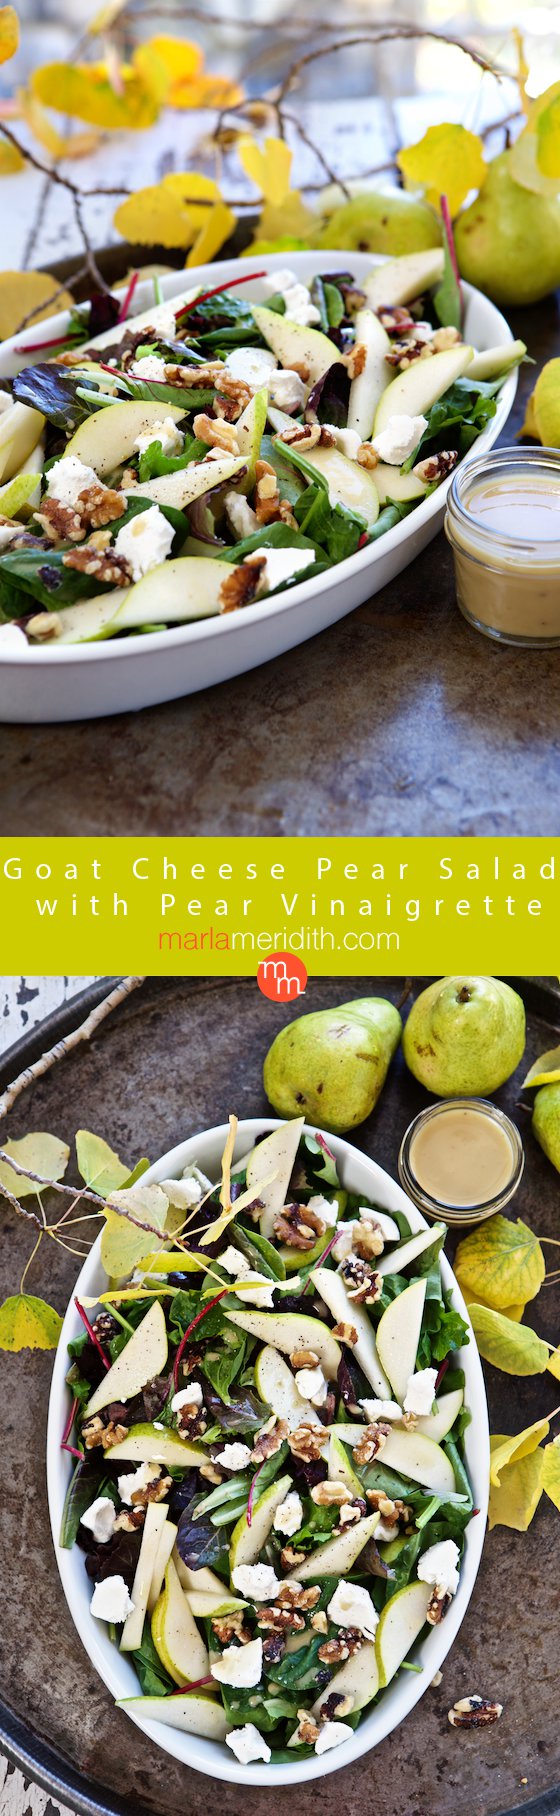 Goat Cheese Pear Salad with Pear Vinaigrette, this recipe is a delicious side dish for Thanksgiving & Christmas. MarlaMeridith.com ( @marlameridith )